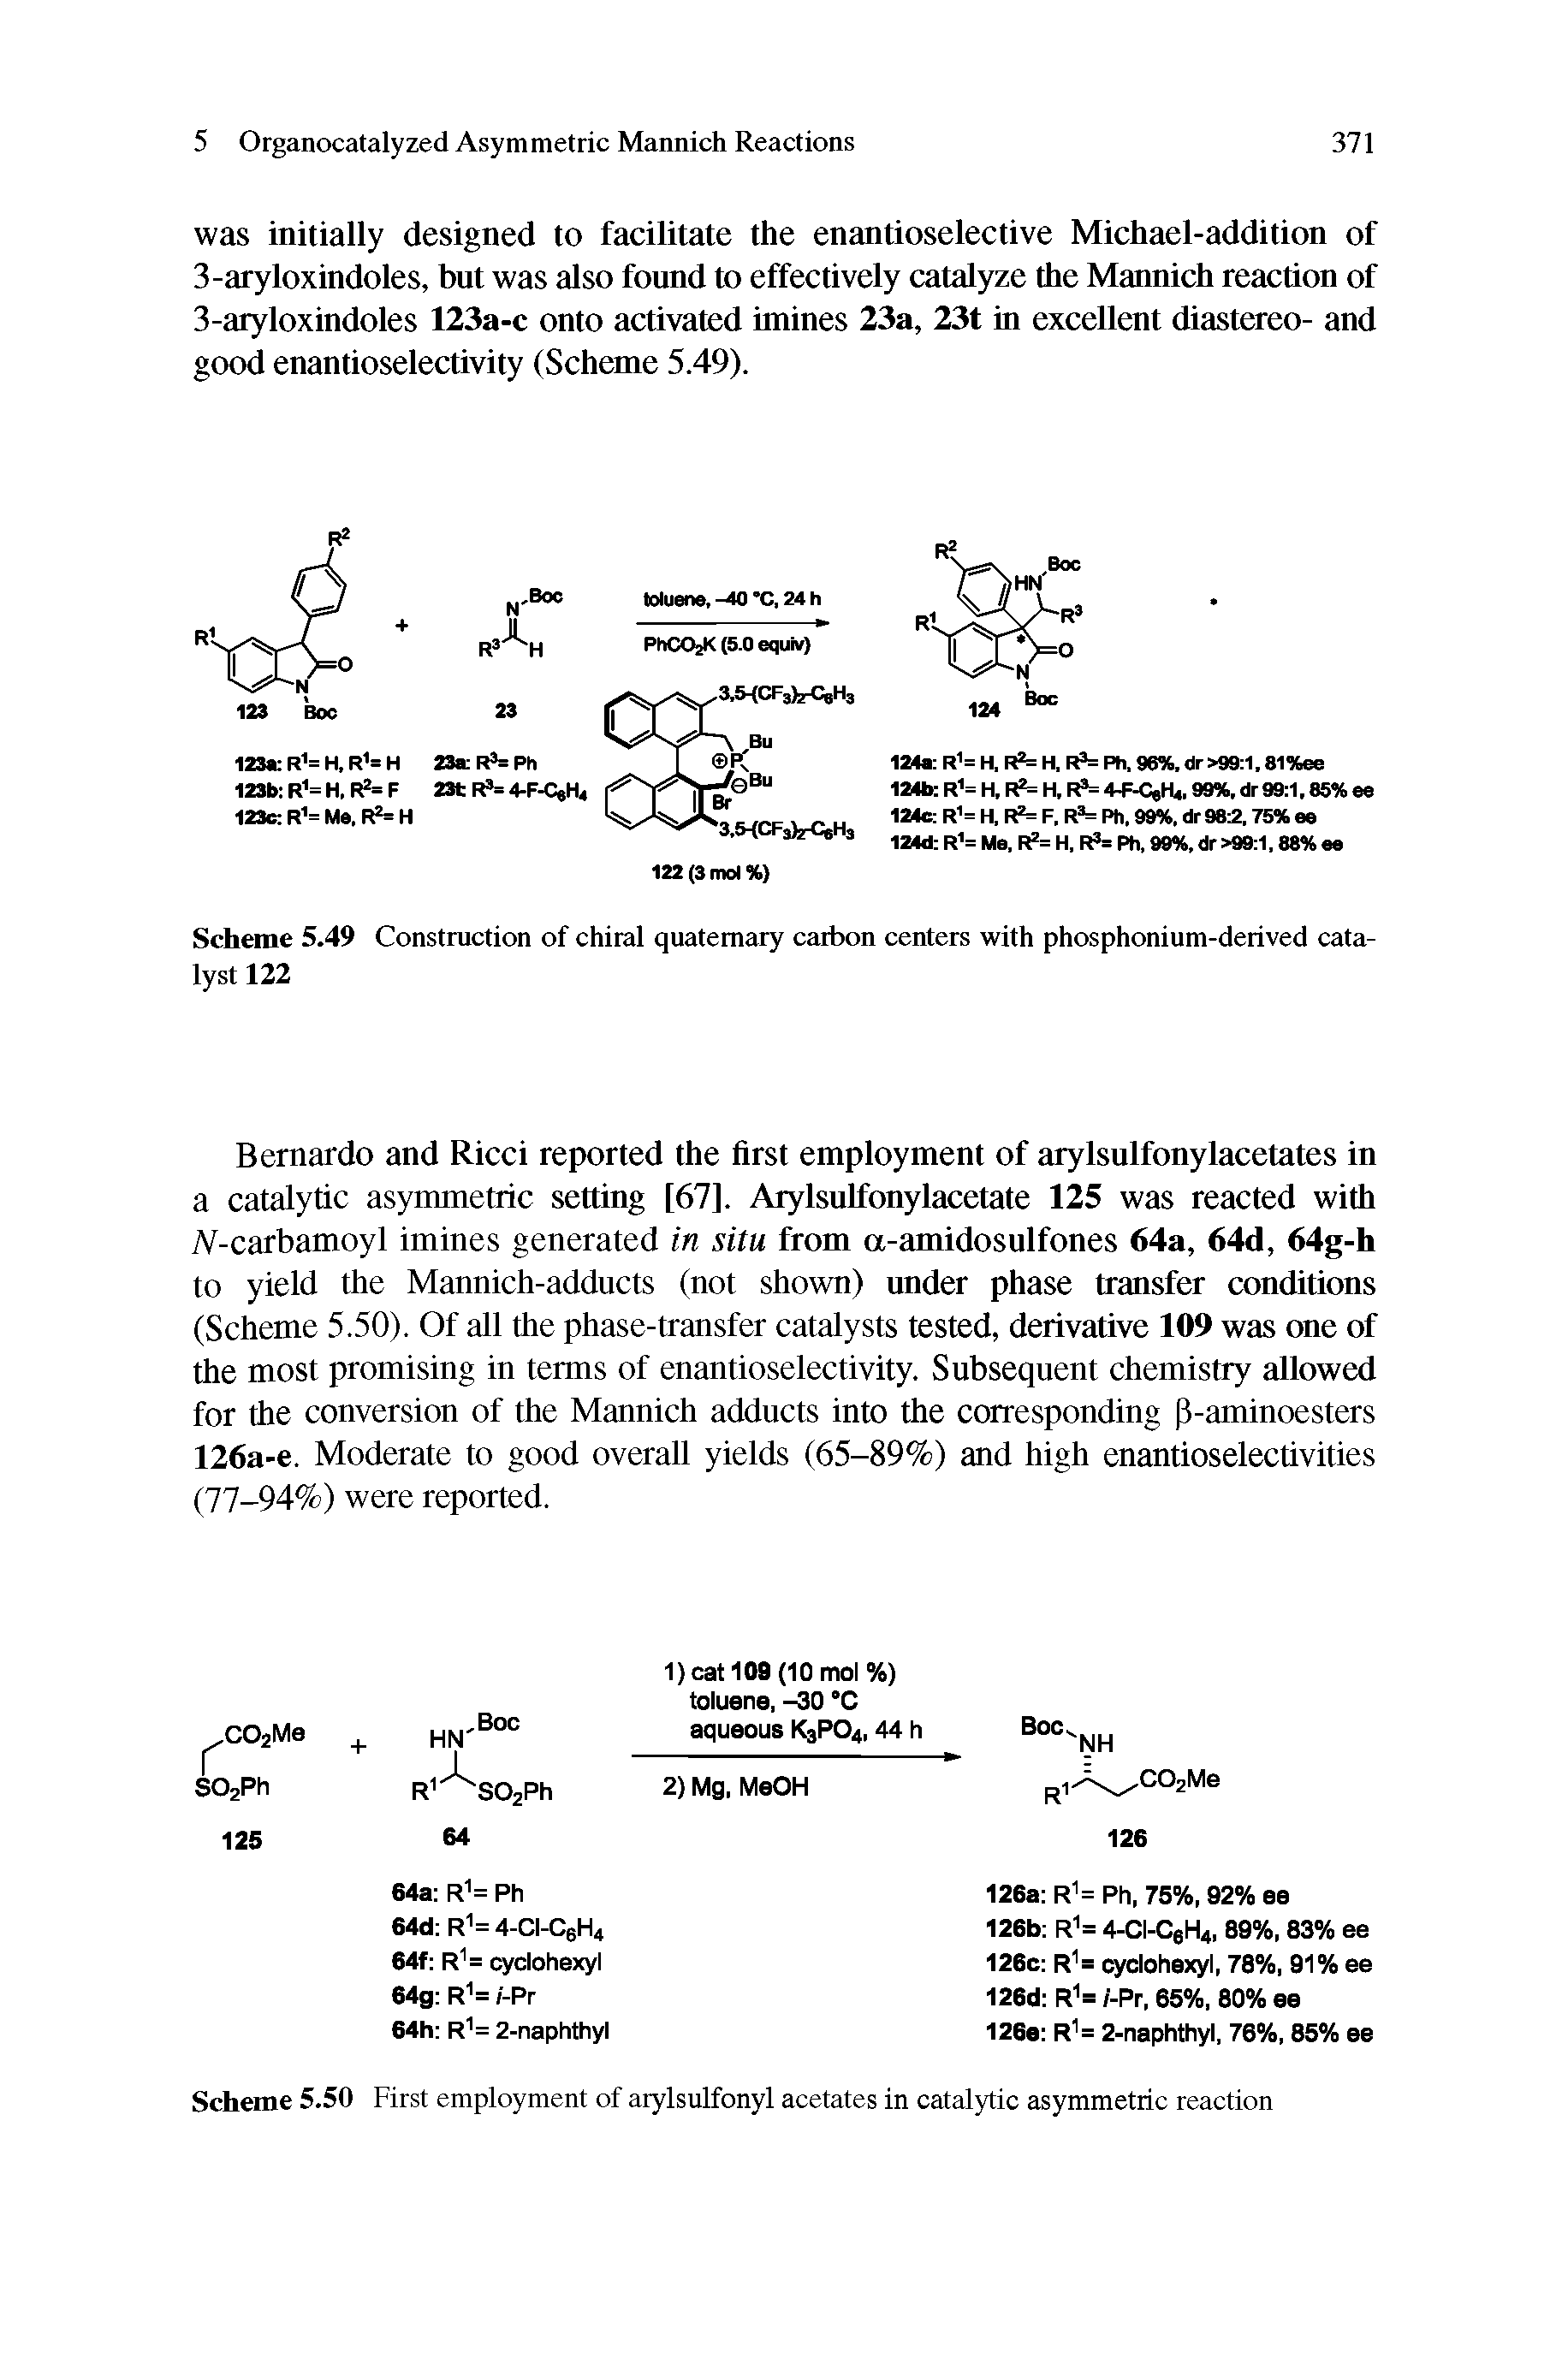 Scheme 5.49 Construction of chiral quaternary carbon centers with phosphonium-derived catalyst 122...